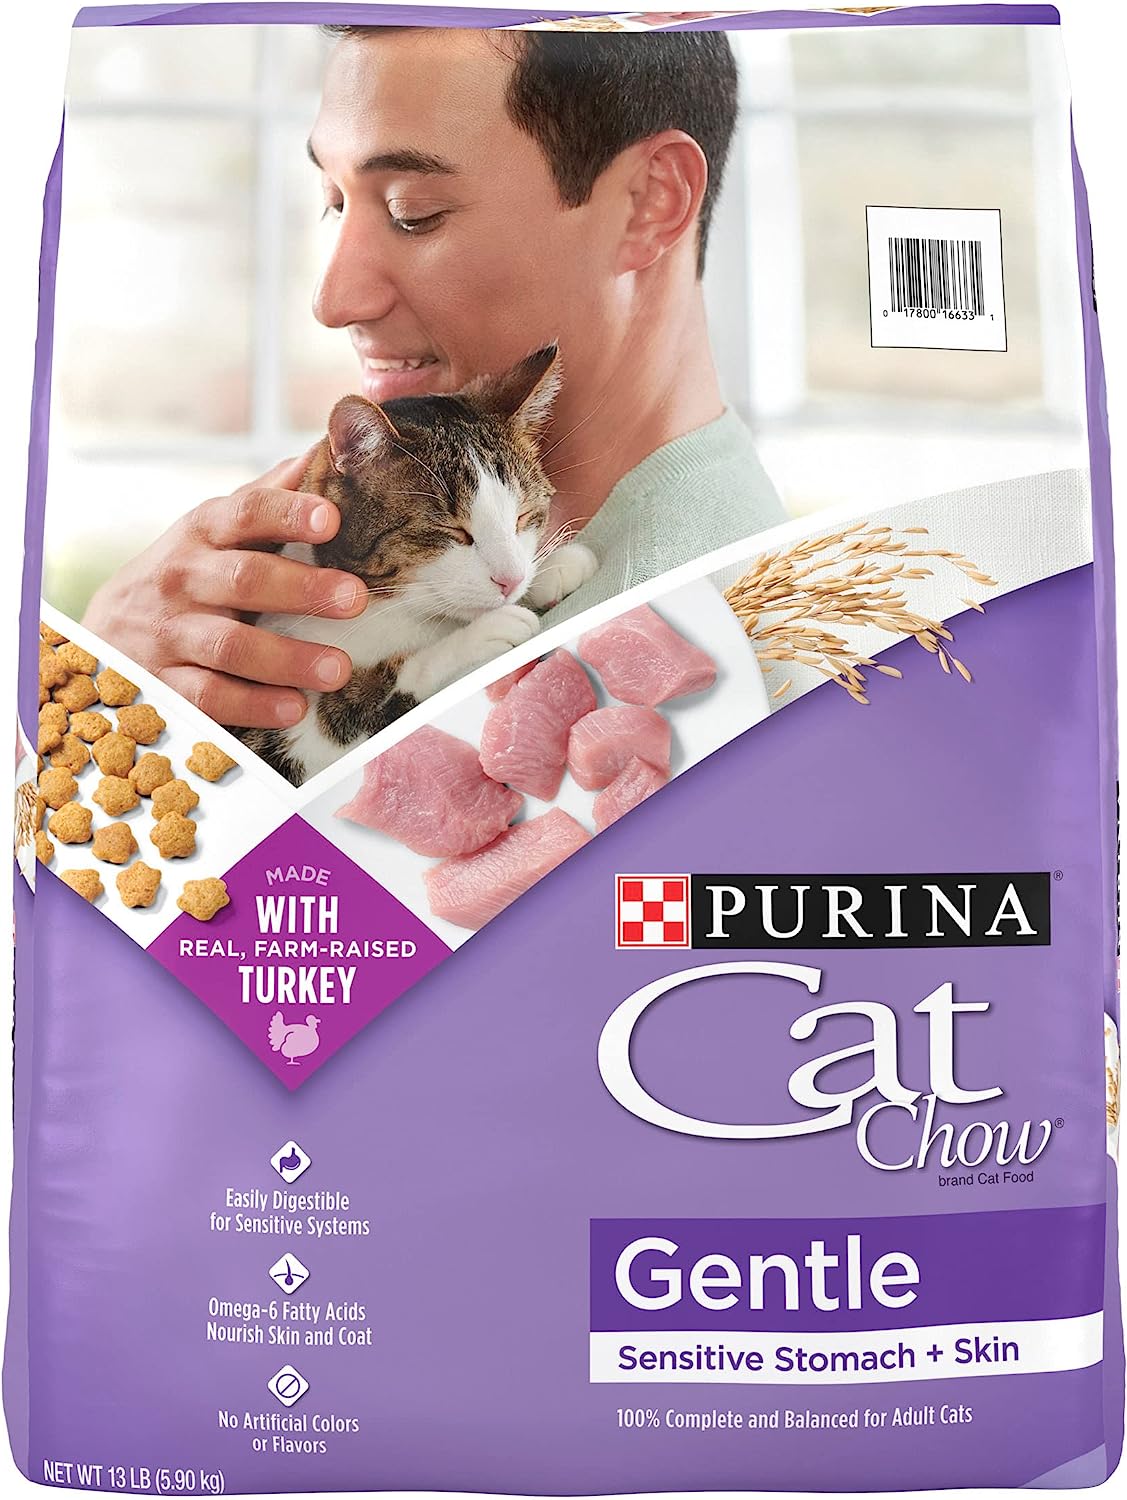 Purina Cat Chow Gentle Dry Cat Food, Sensitive Stomach + Skin